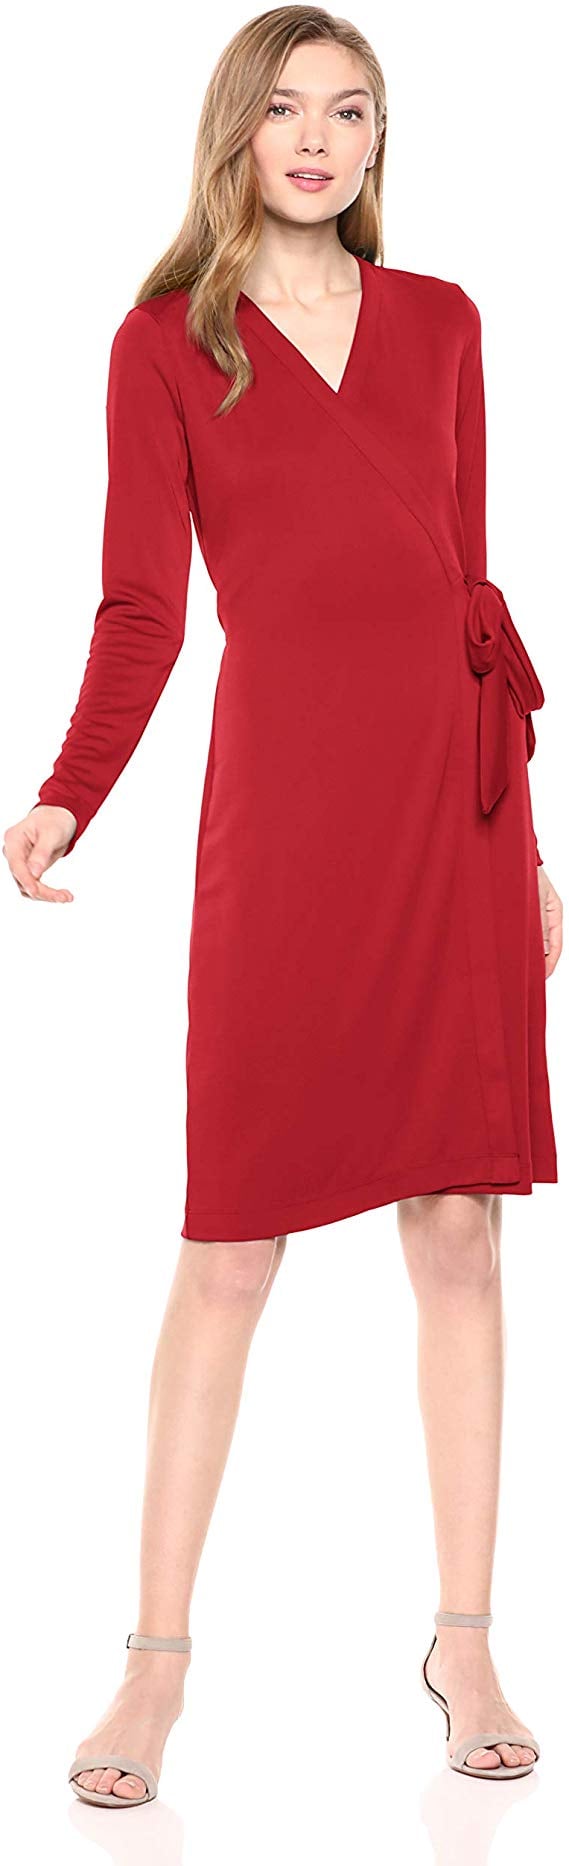 Lark & Ro Signature Long-Sleeve Wrap Dress | The 25 Most Flattering Dresses  on Amazon Hit All the Right Places, So You'll Feel 100% | POPSUGAR Fashion  Photo 10